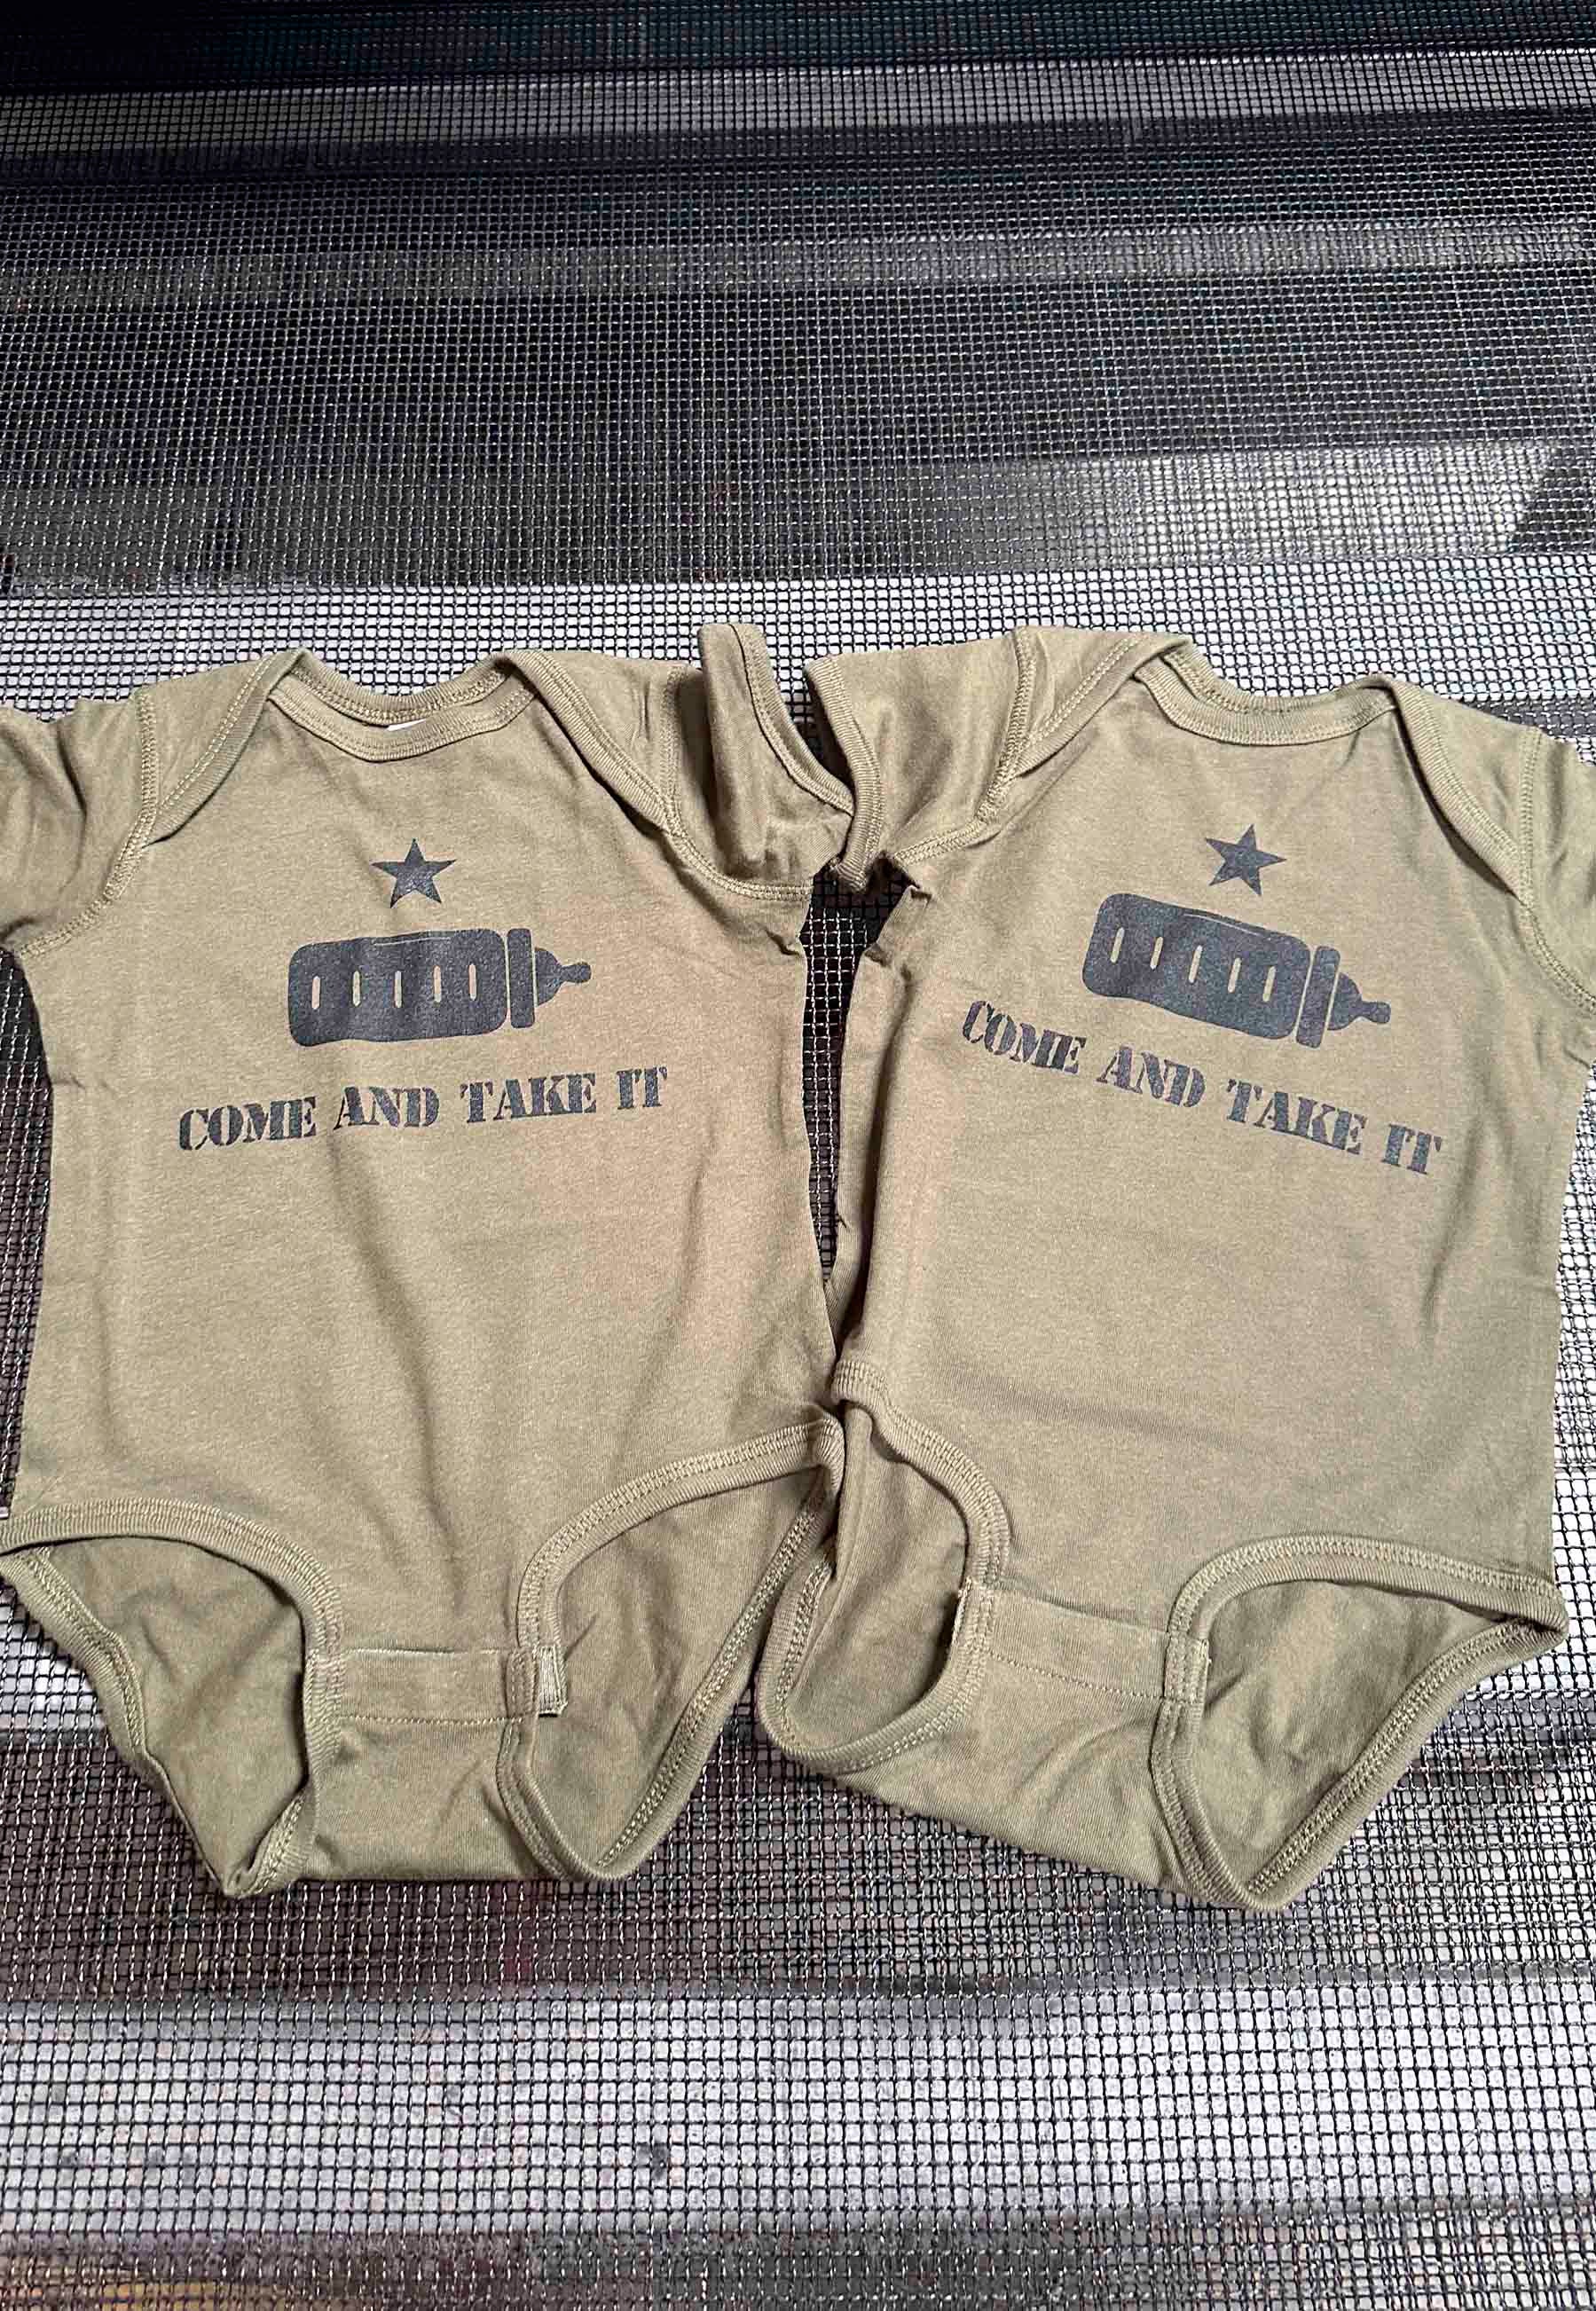 Come and take it onesies for patriot babies